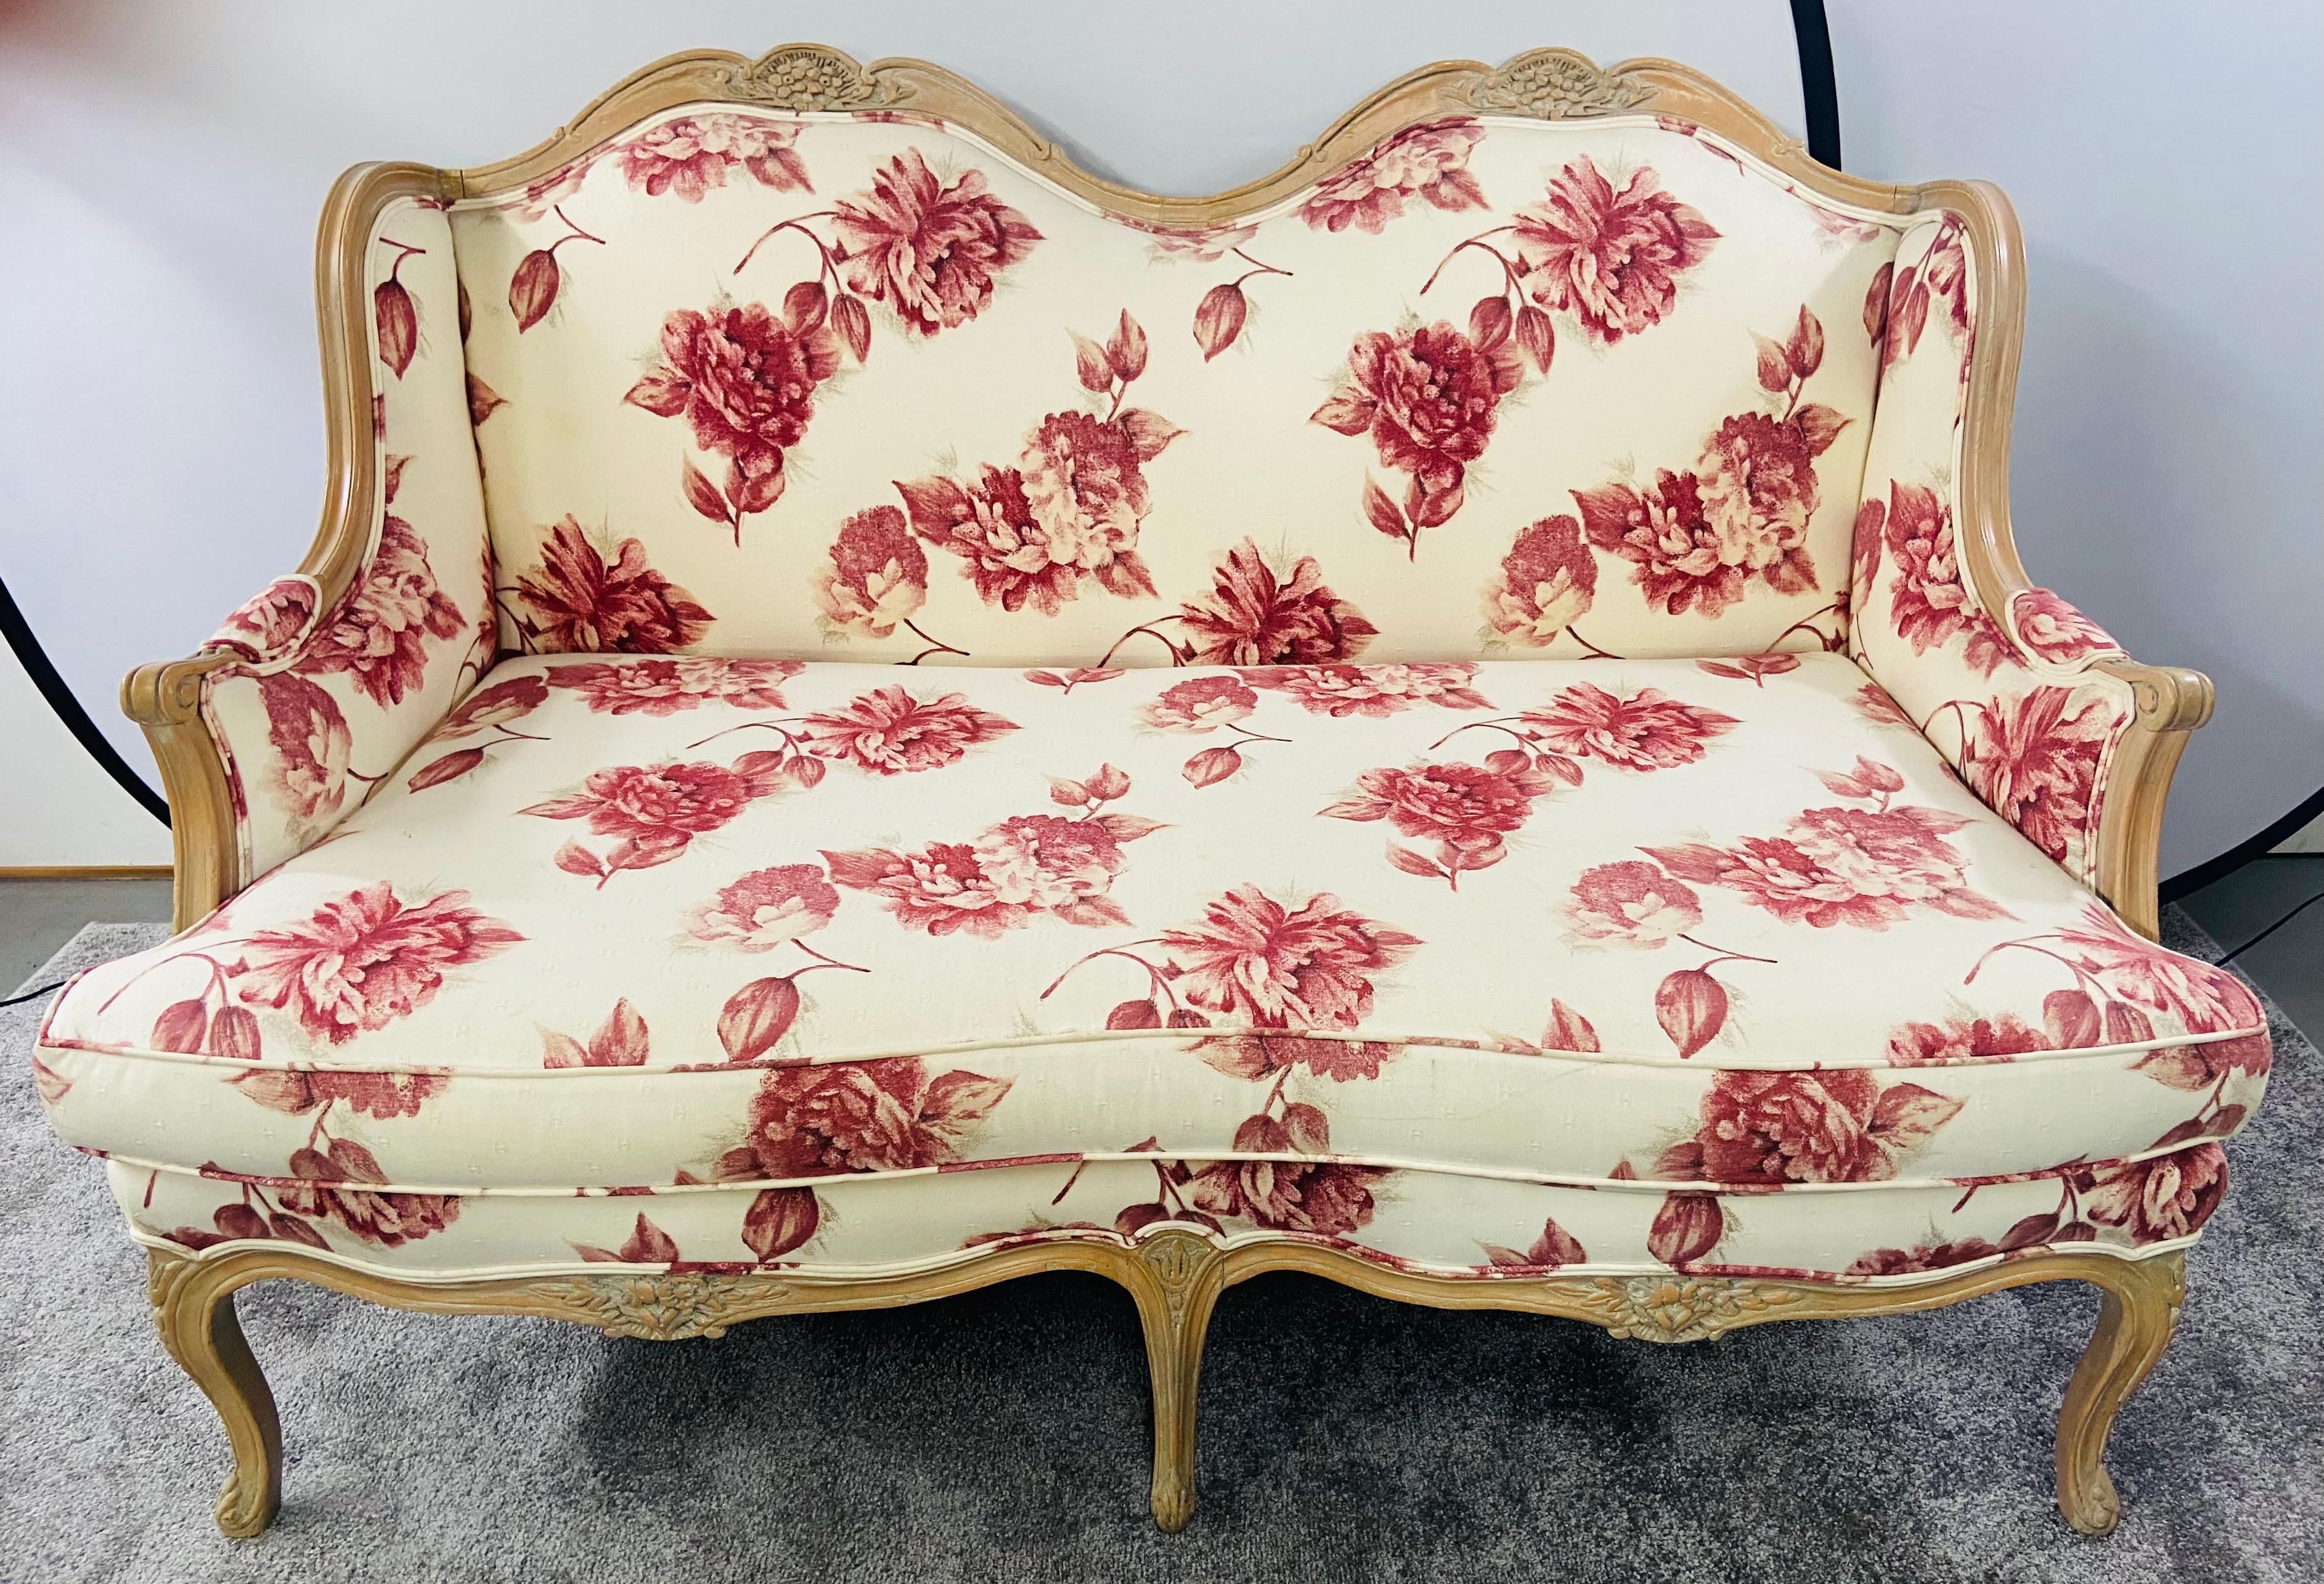 French Louis XV Style Settee or Canape with Floral Upholstery in Red & White For Sale 1